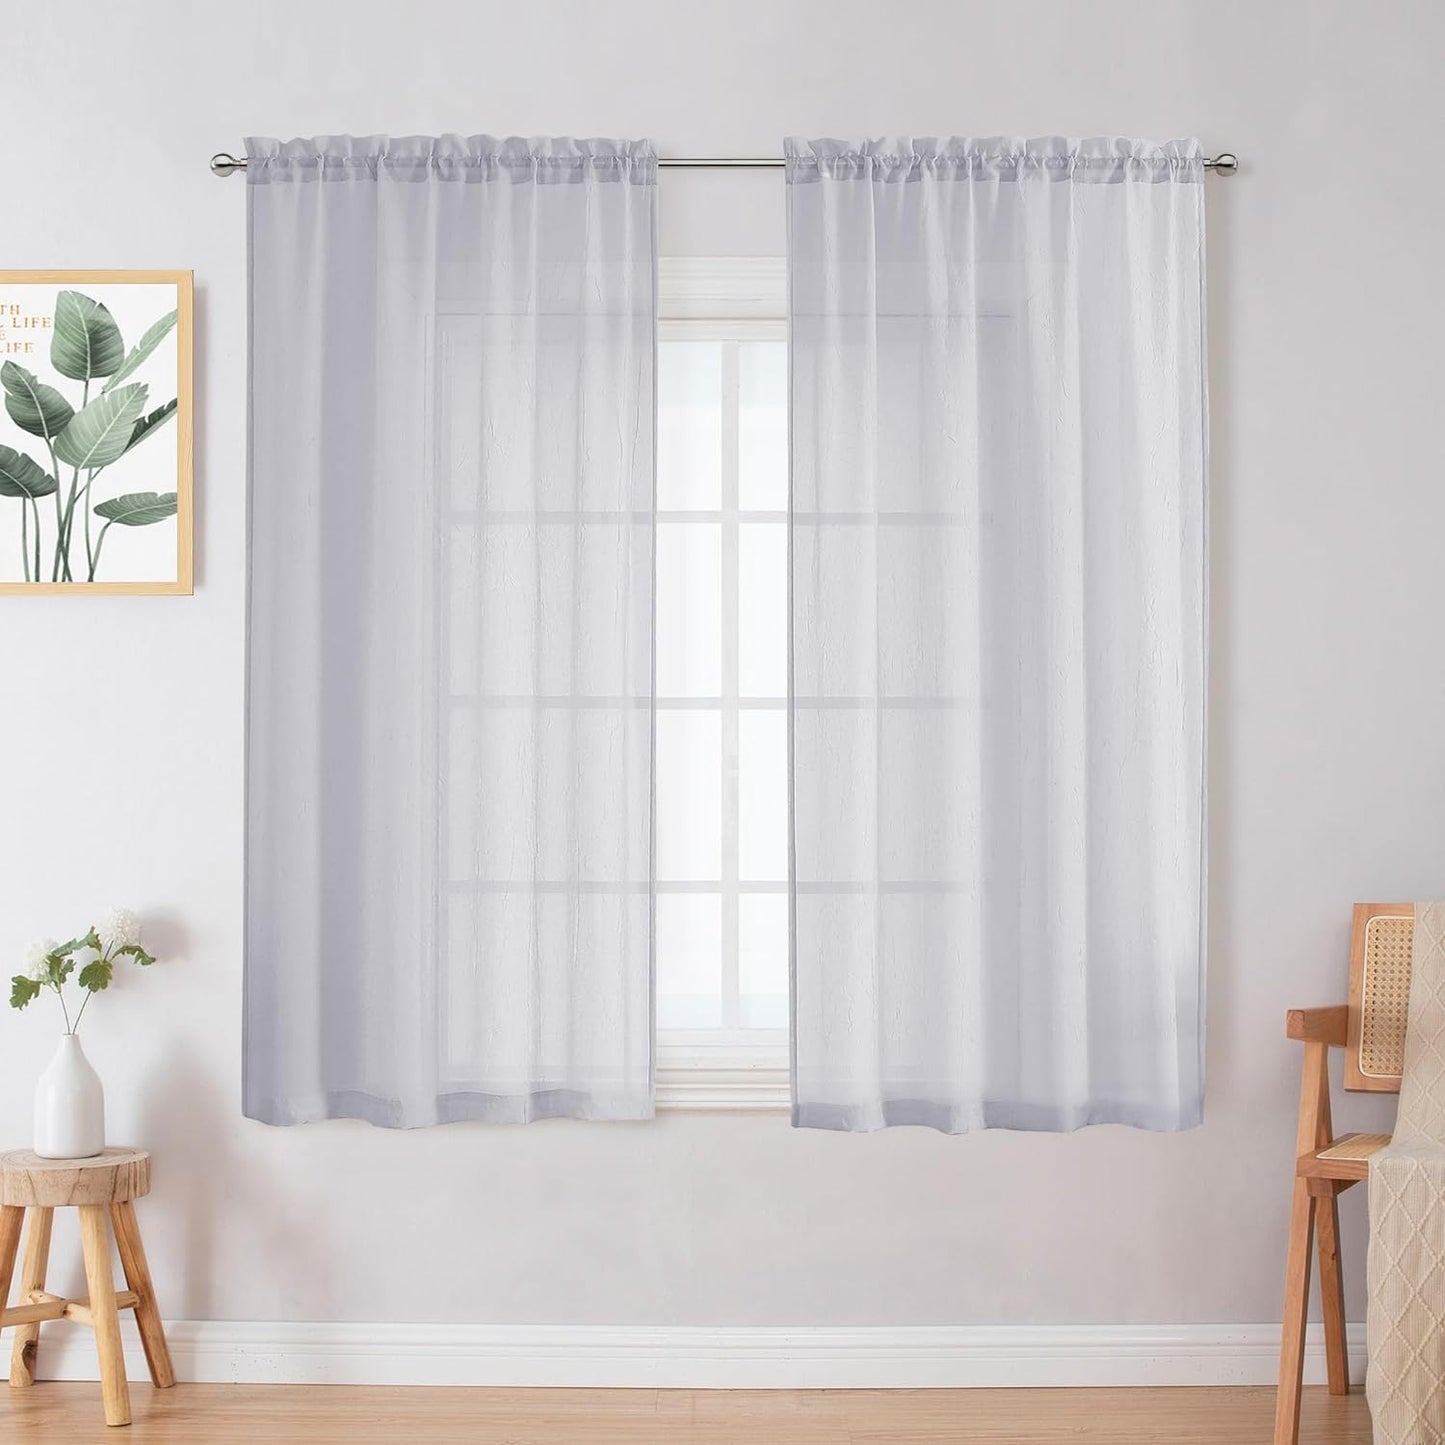 Chyhomenyc Crushed White Sheer Valances for Window 14 Inch Length 2 PCS, Crinkle Voile Short Kitchen Curtains with Dual Rod Pockets，Gauzy Bedroom Curtain Valance，Each 42Wx14L Inches  Chyhomenyc Light Grey 28 W X 45 L 